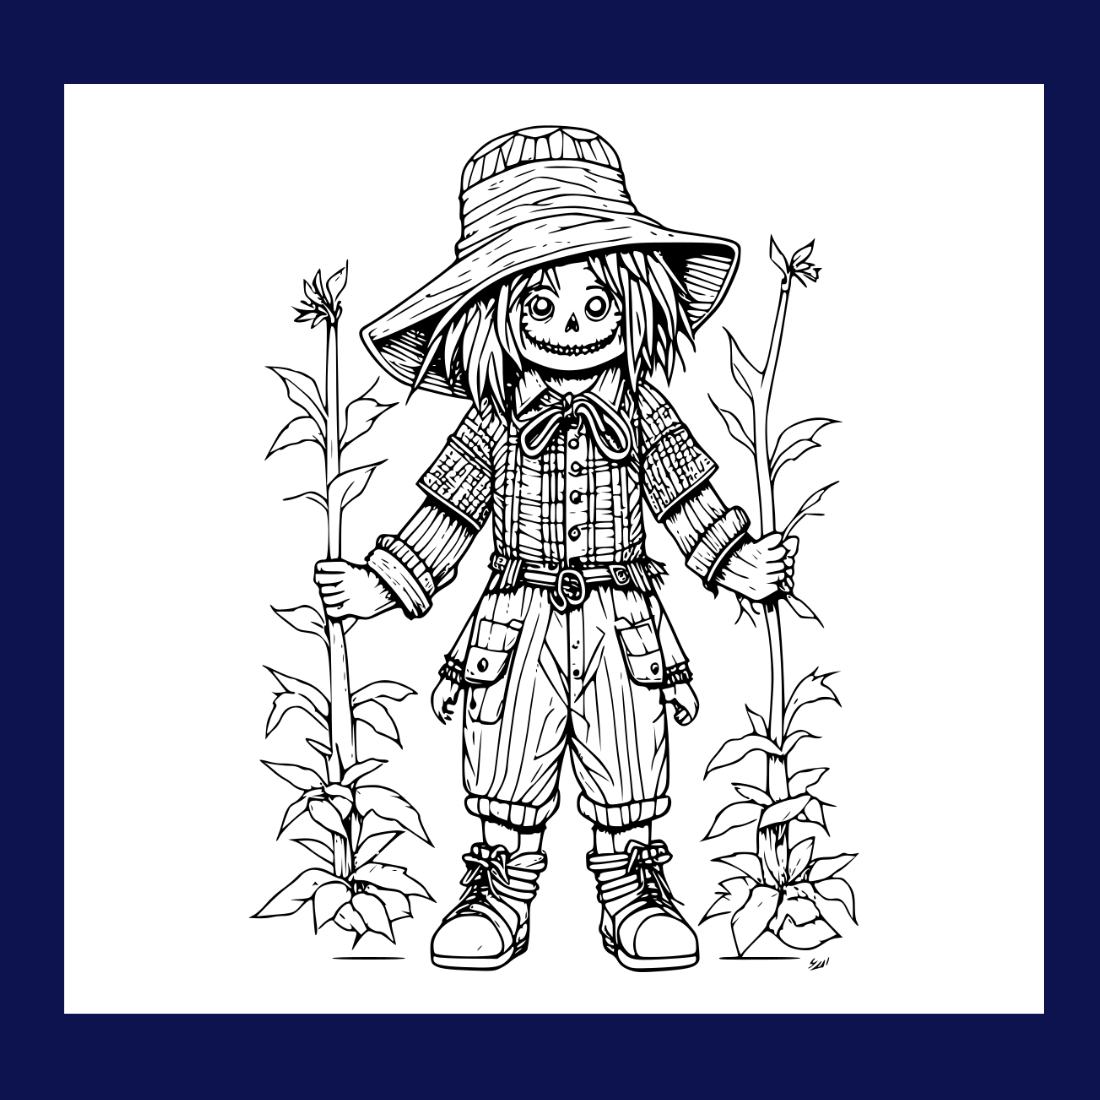 Coloring pages bundle for adultsa illustration of cute scarecrow character horror and creepy